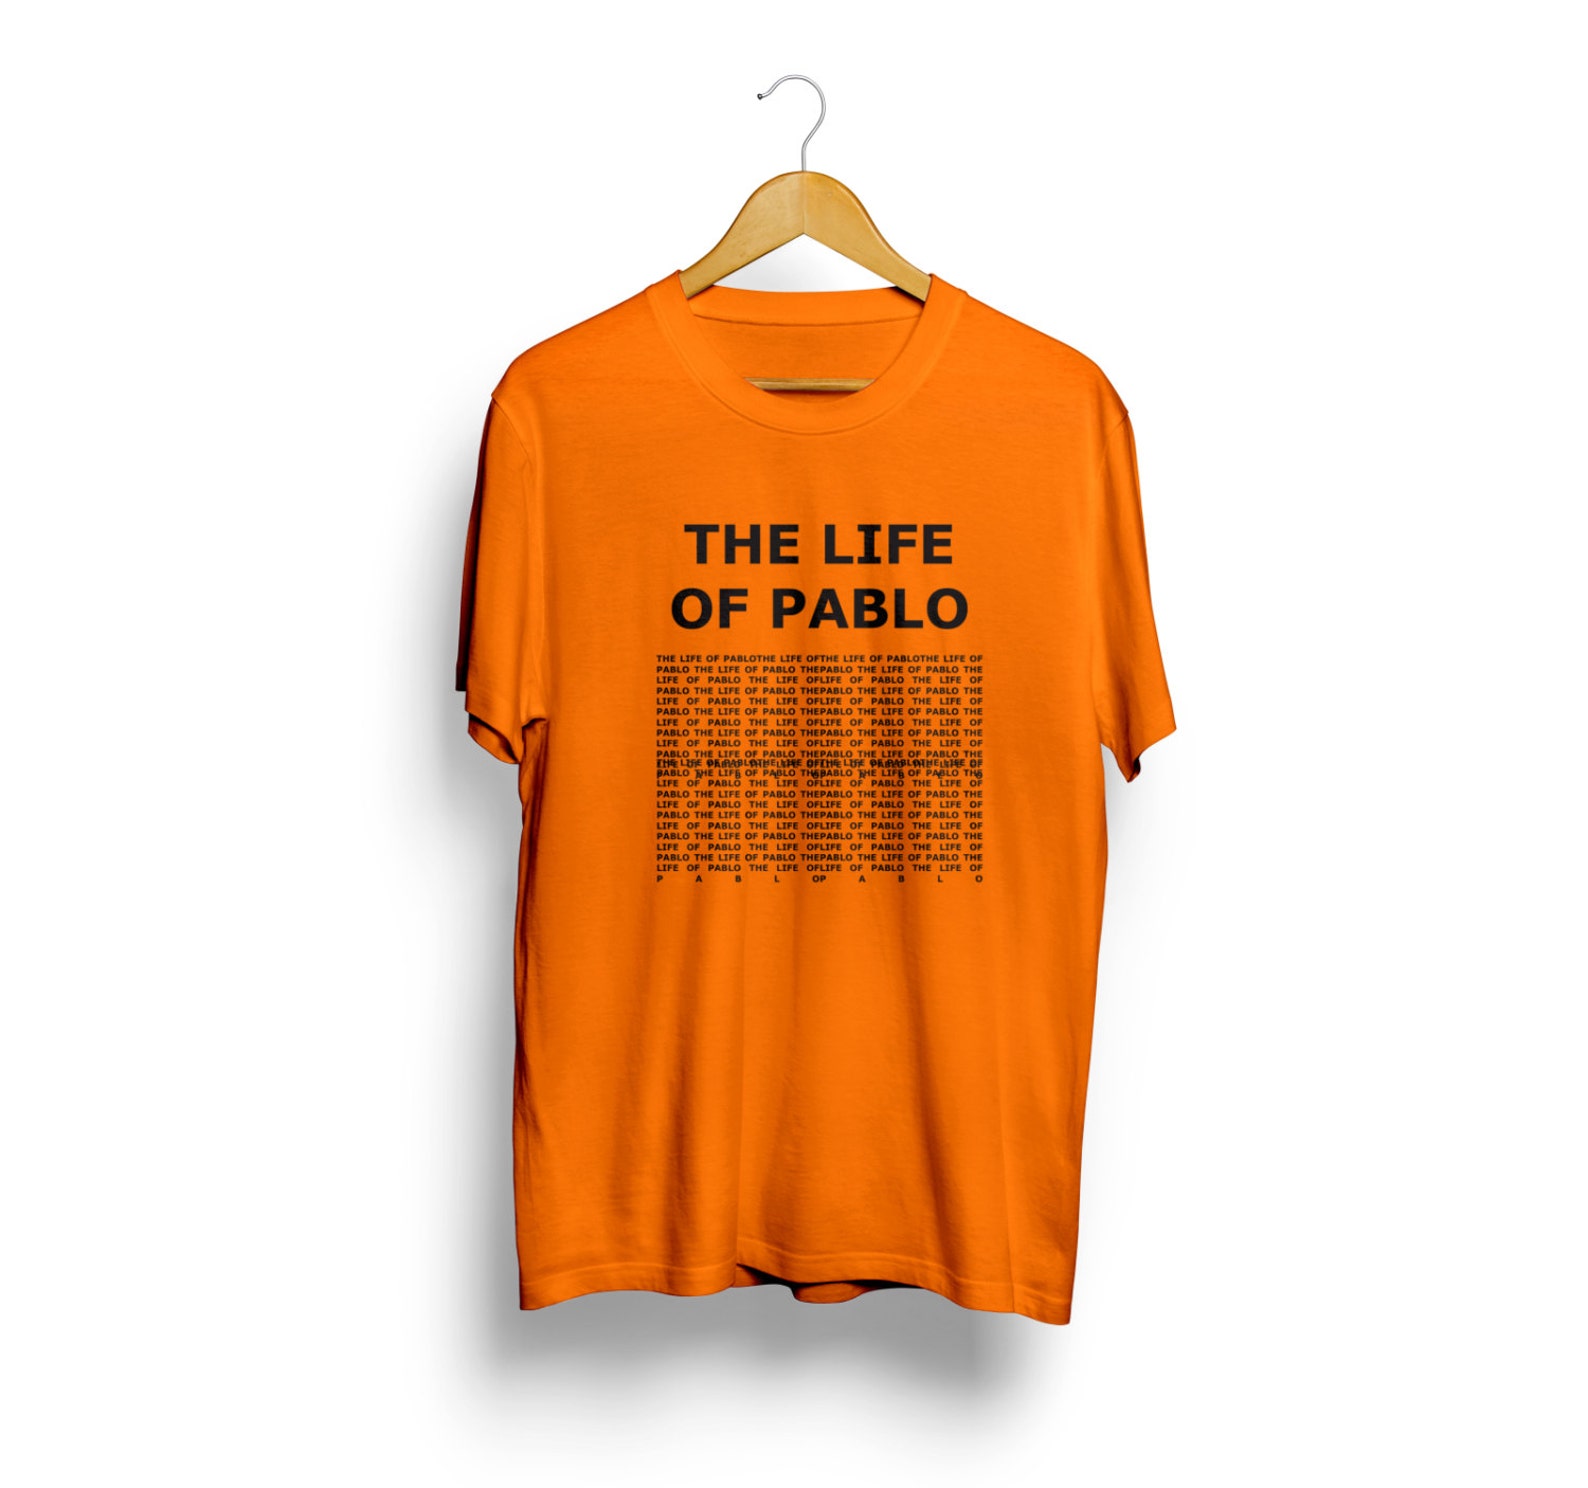 The life of pablo. The Life of Pablo футболка. Футболка Kanye West. The Life of Pablo Канье Уэст. Kanye Tshirt.